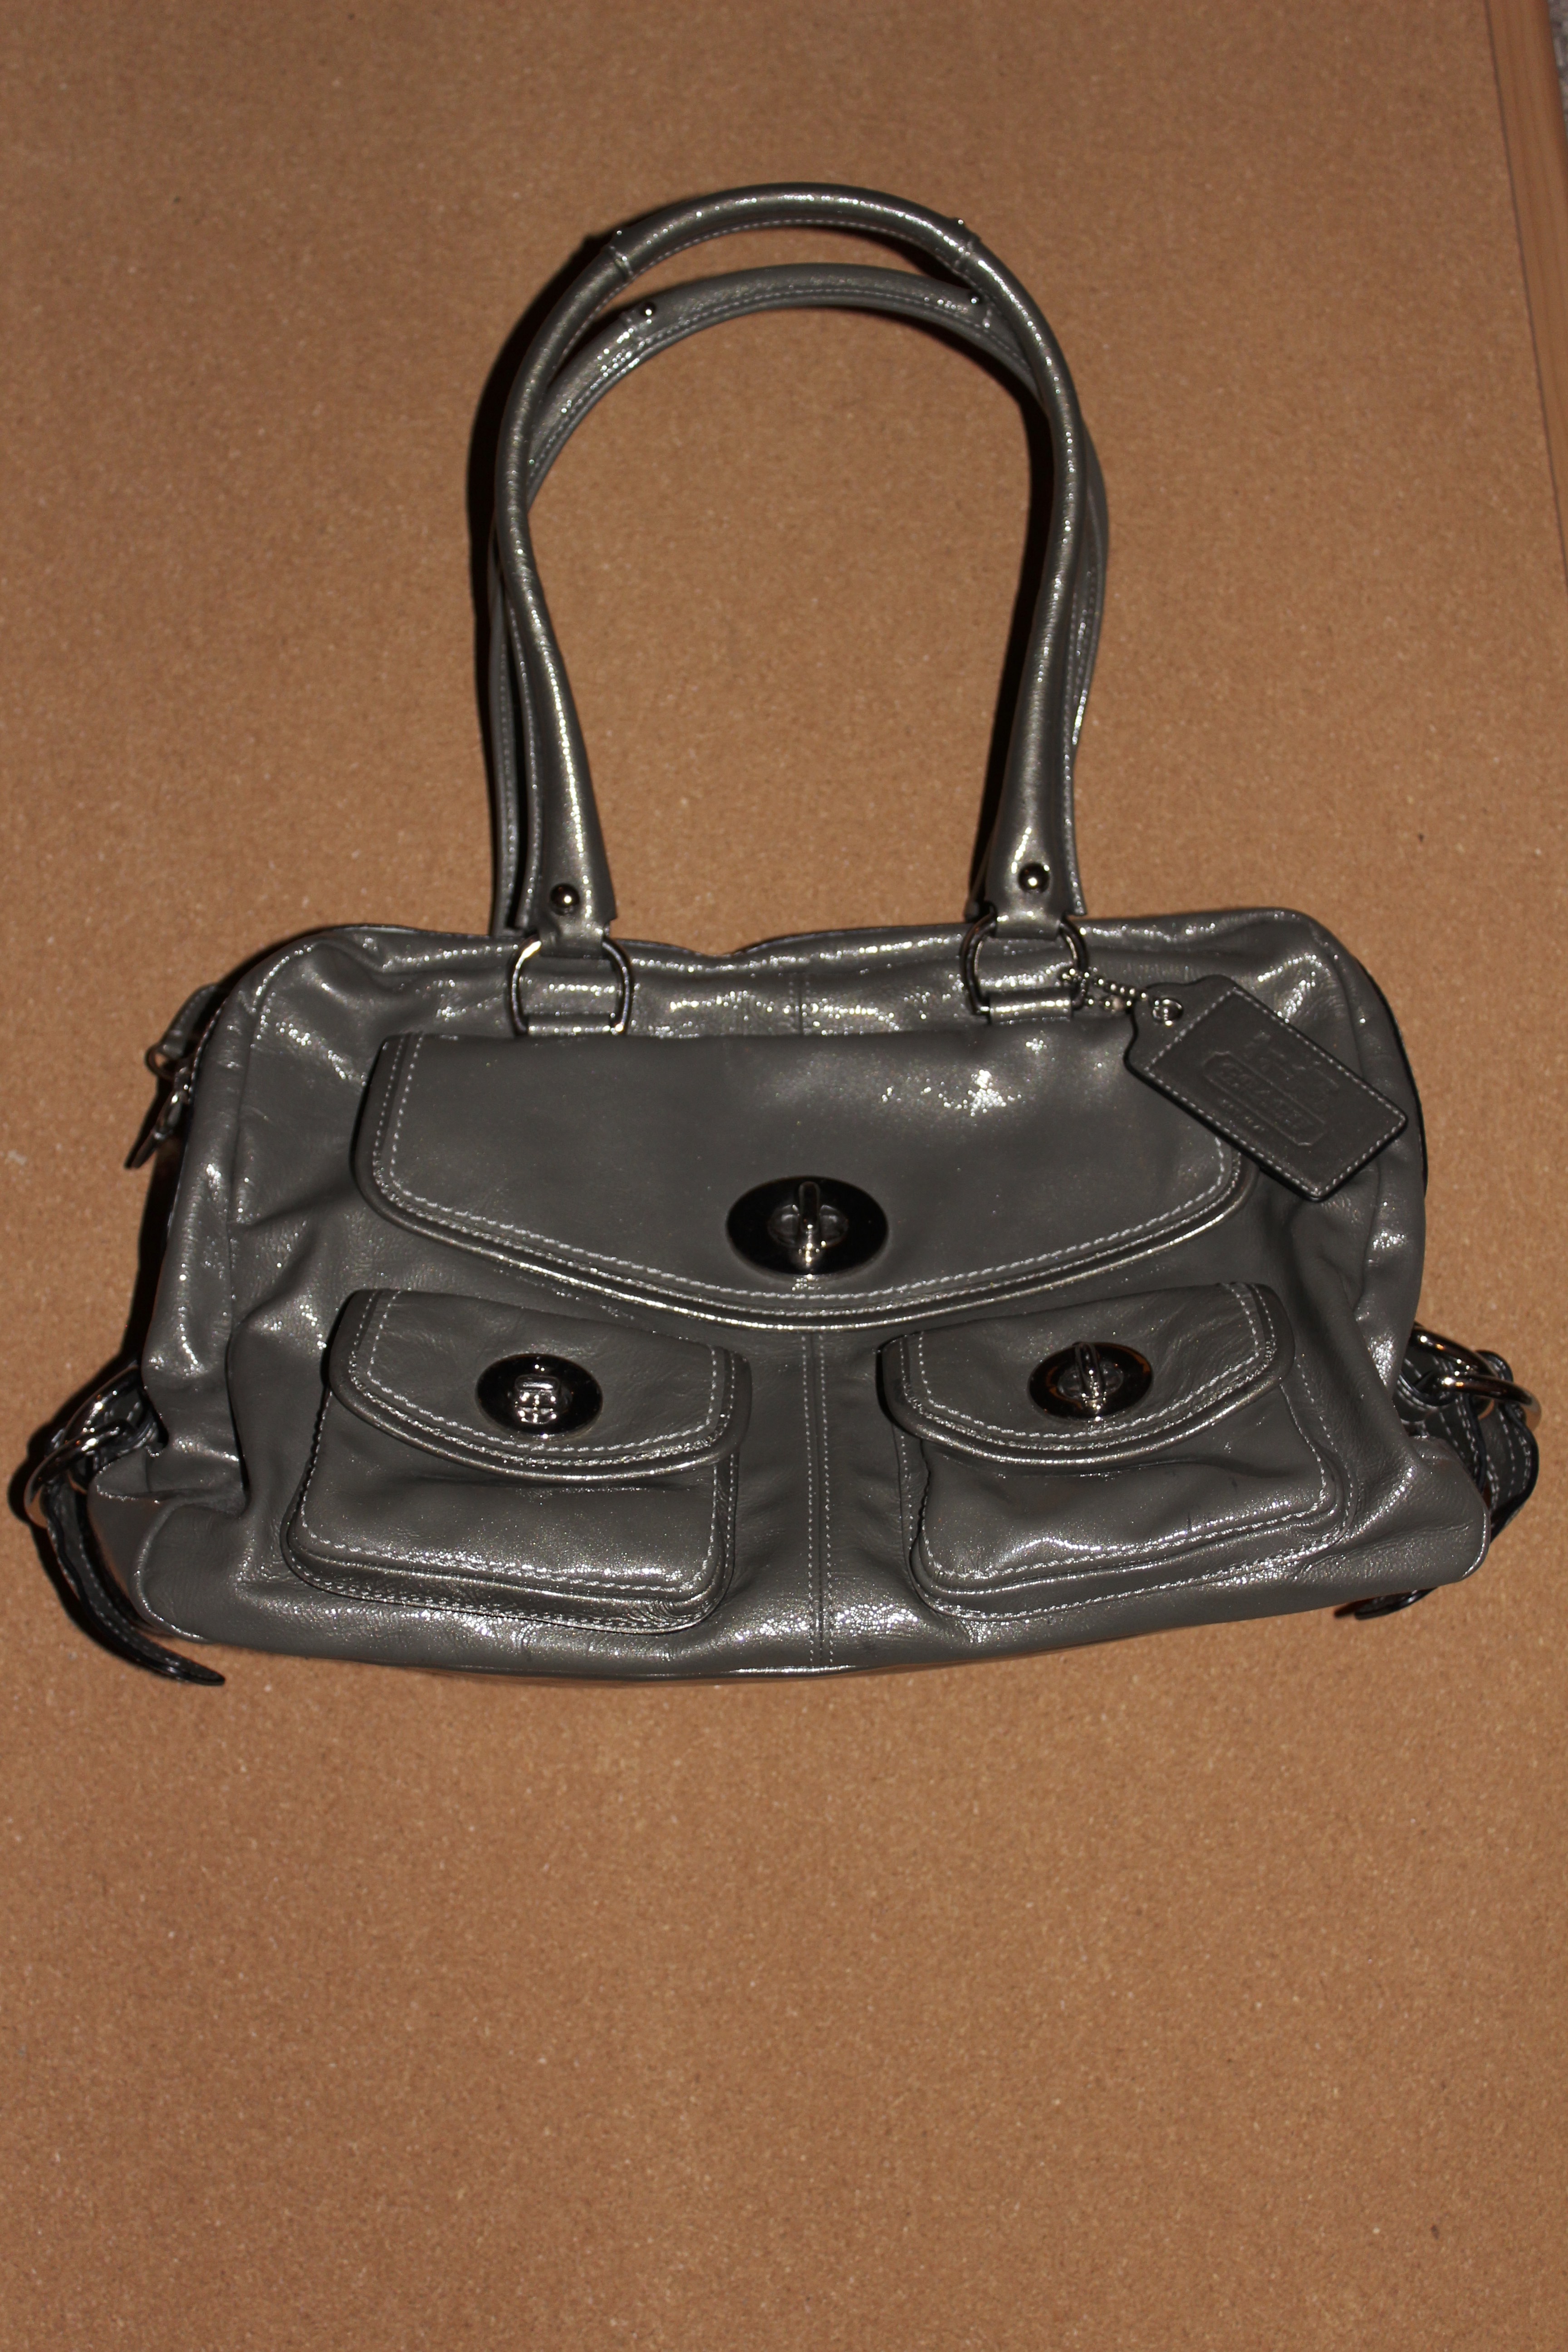 4 Gorgeous Coach Authentic Handbags - Never Used! For Sale | www.bagssaleusa.com/product-category/scarves/ | Classifieds